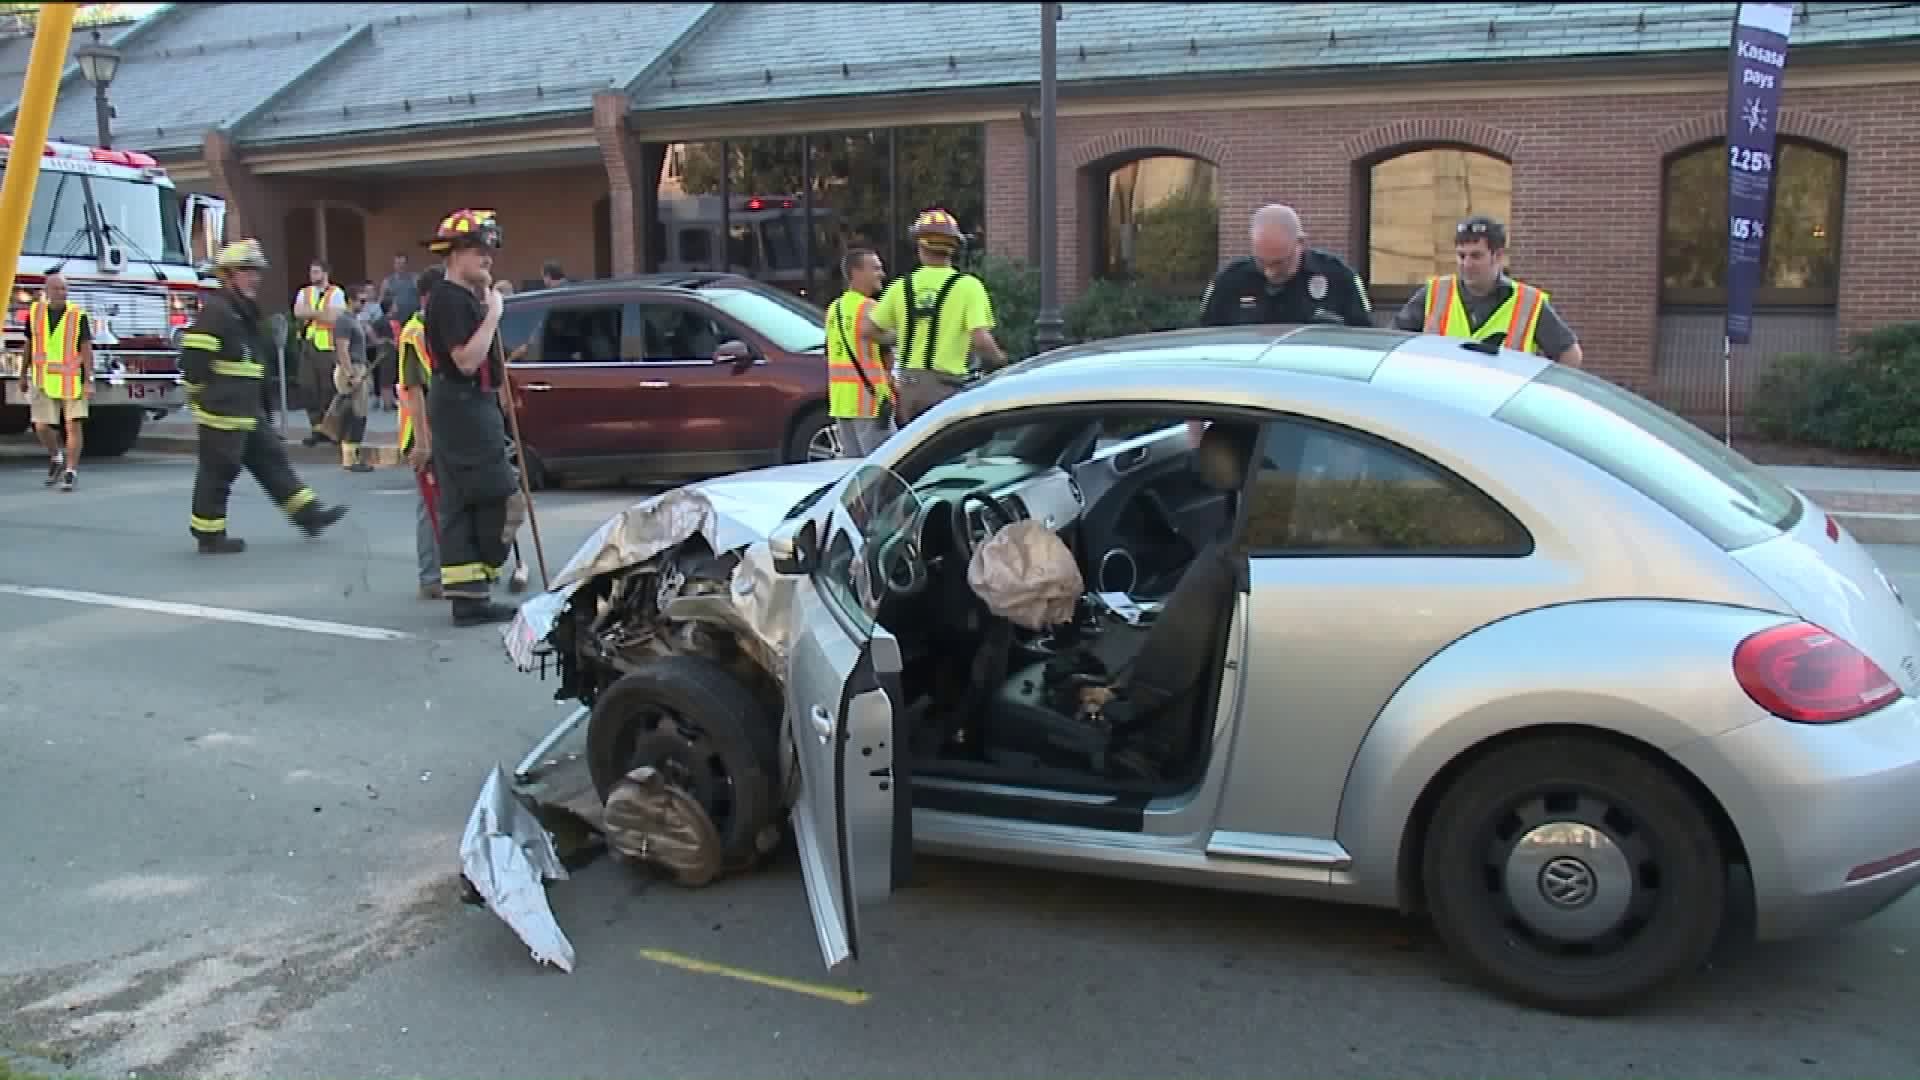 Driver Injured in High-speed Crash in Honesdale